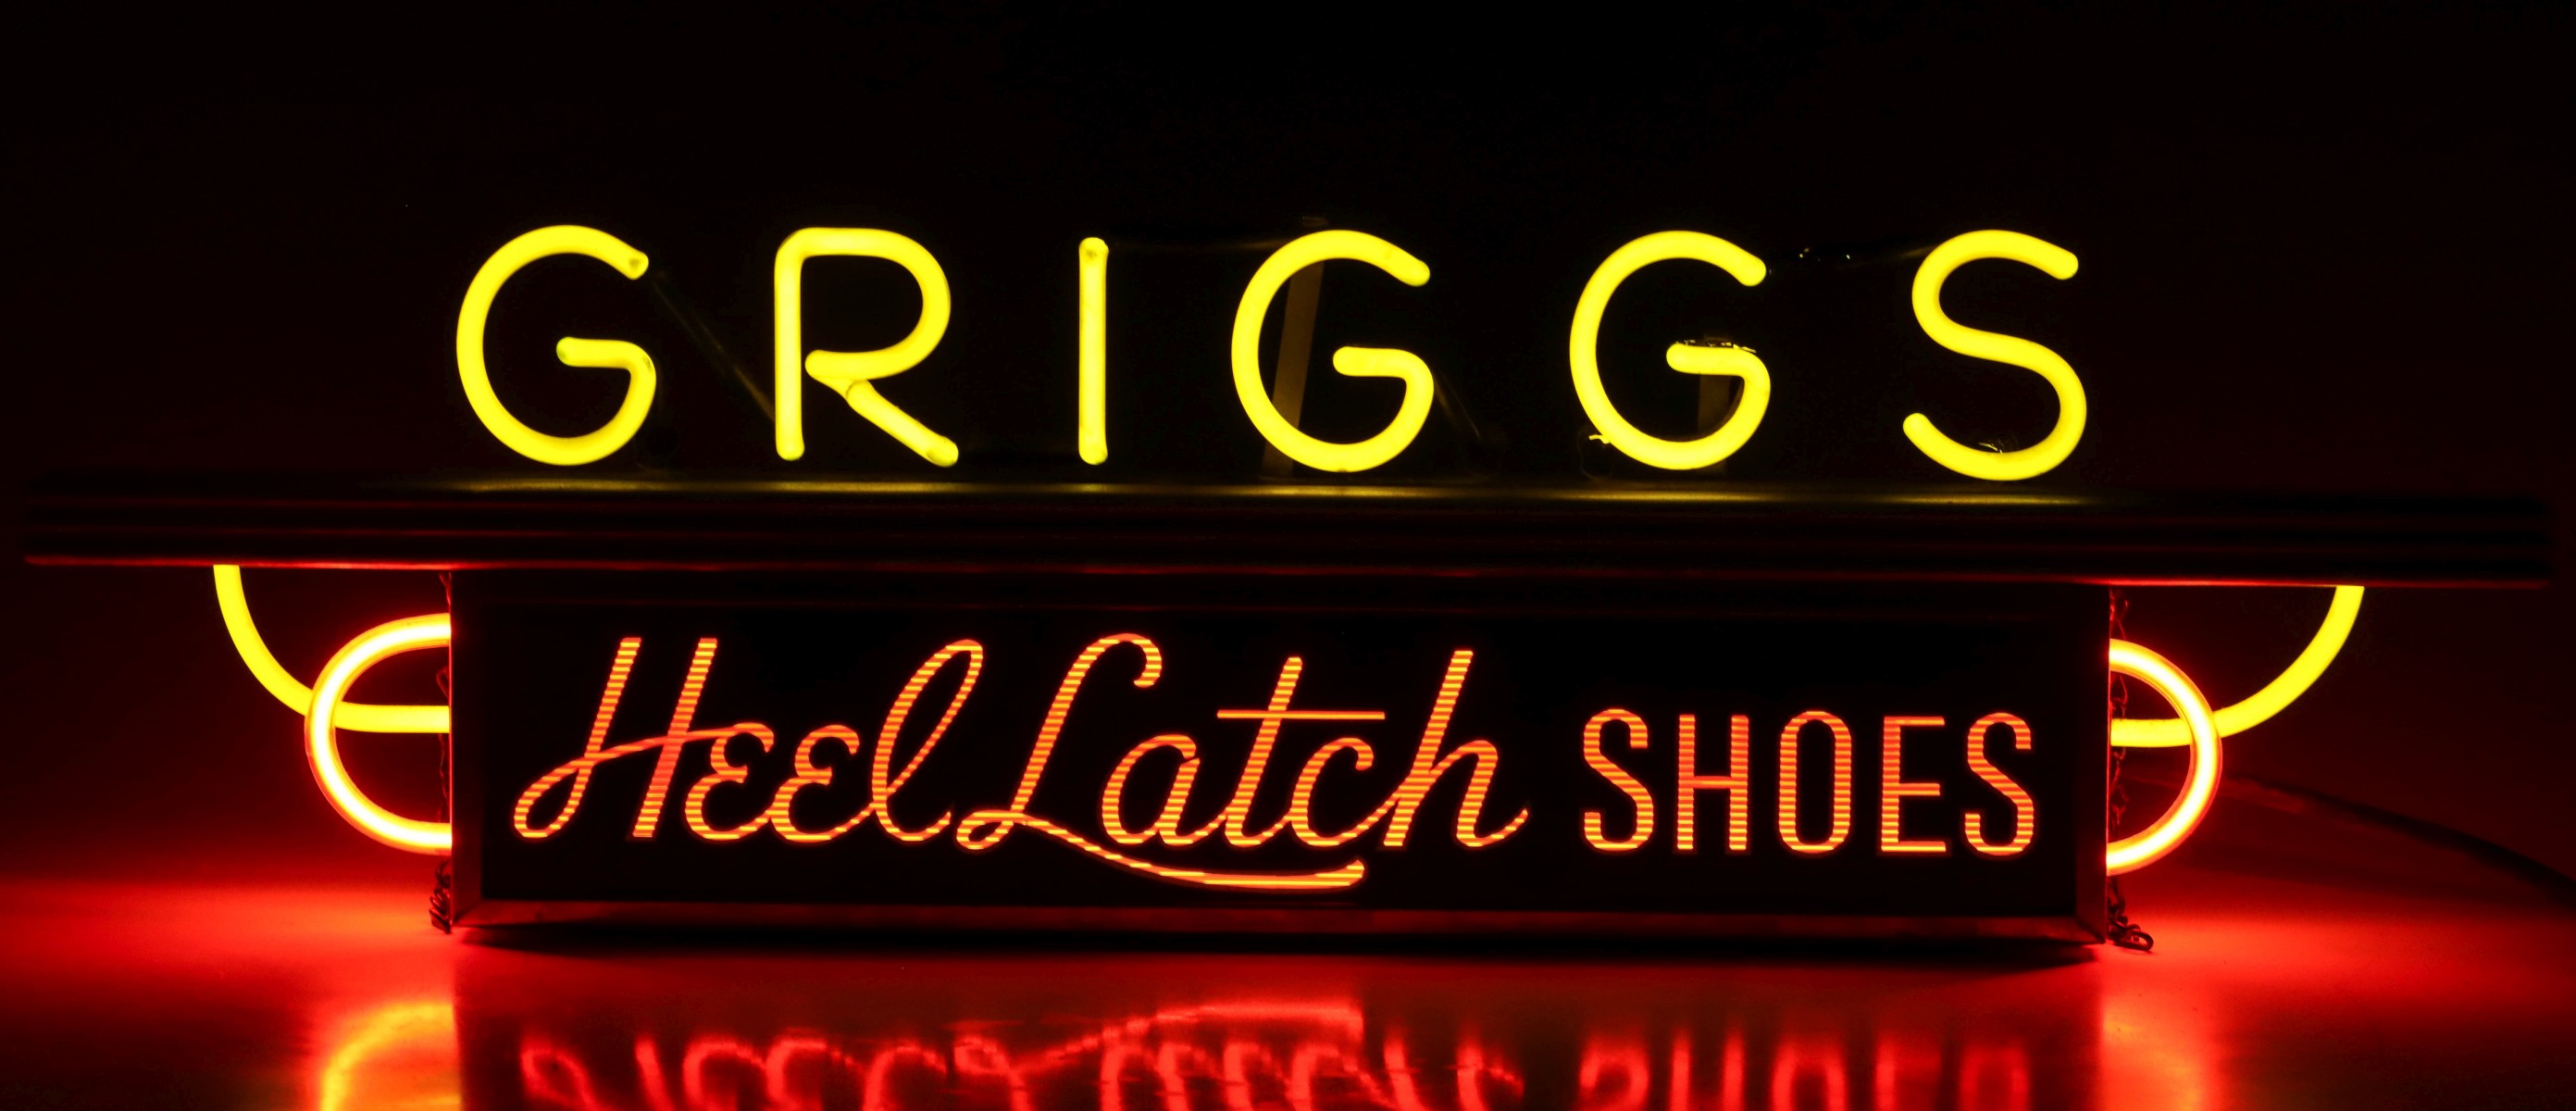 A GRIGGS HEEL LATCH SHOES 1930s NEON WITH BACKLIT CAN